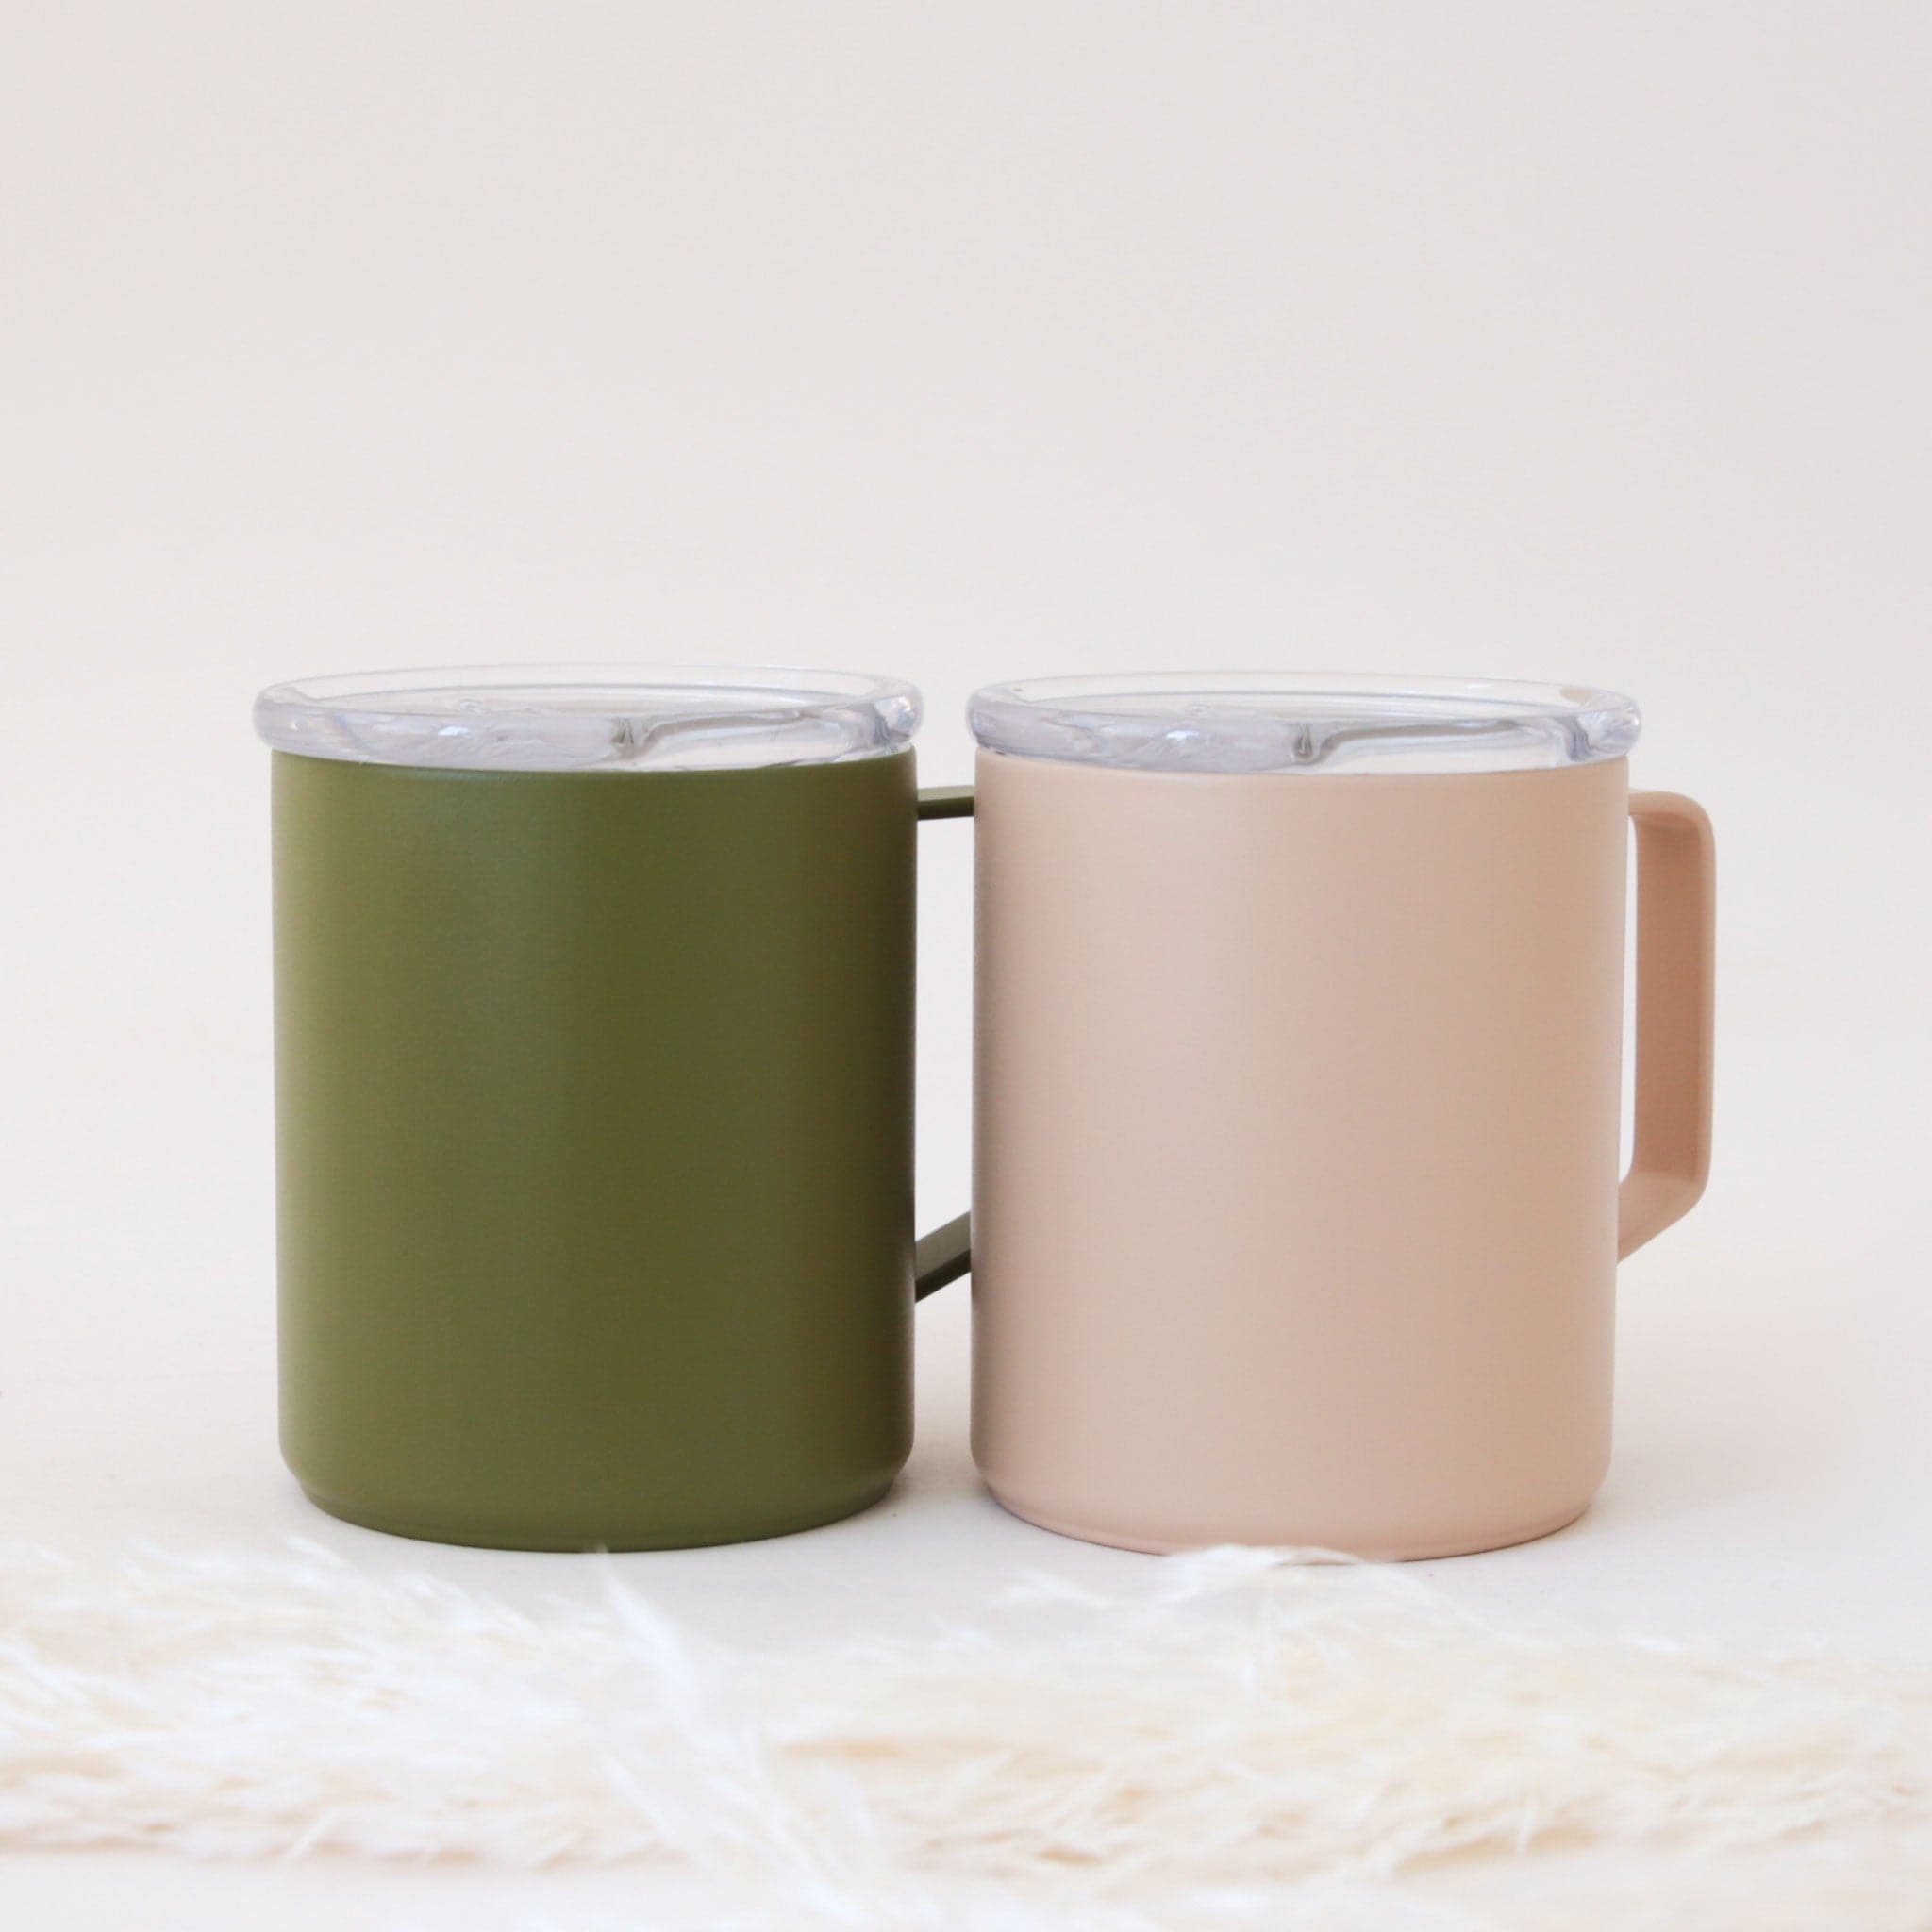 A light pink travel mug with a handle and a snap on lid.